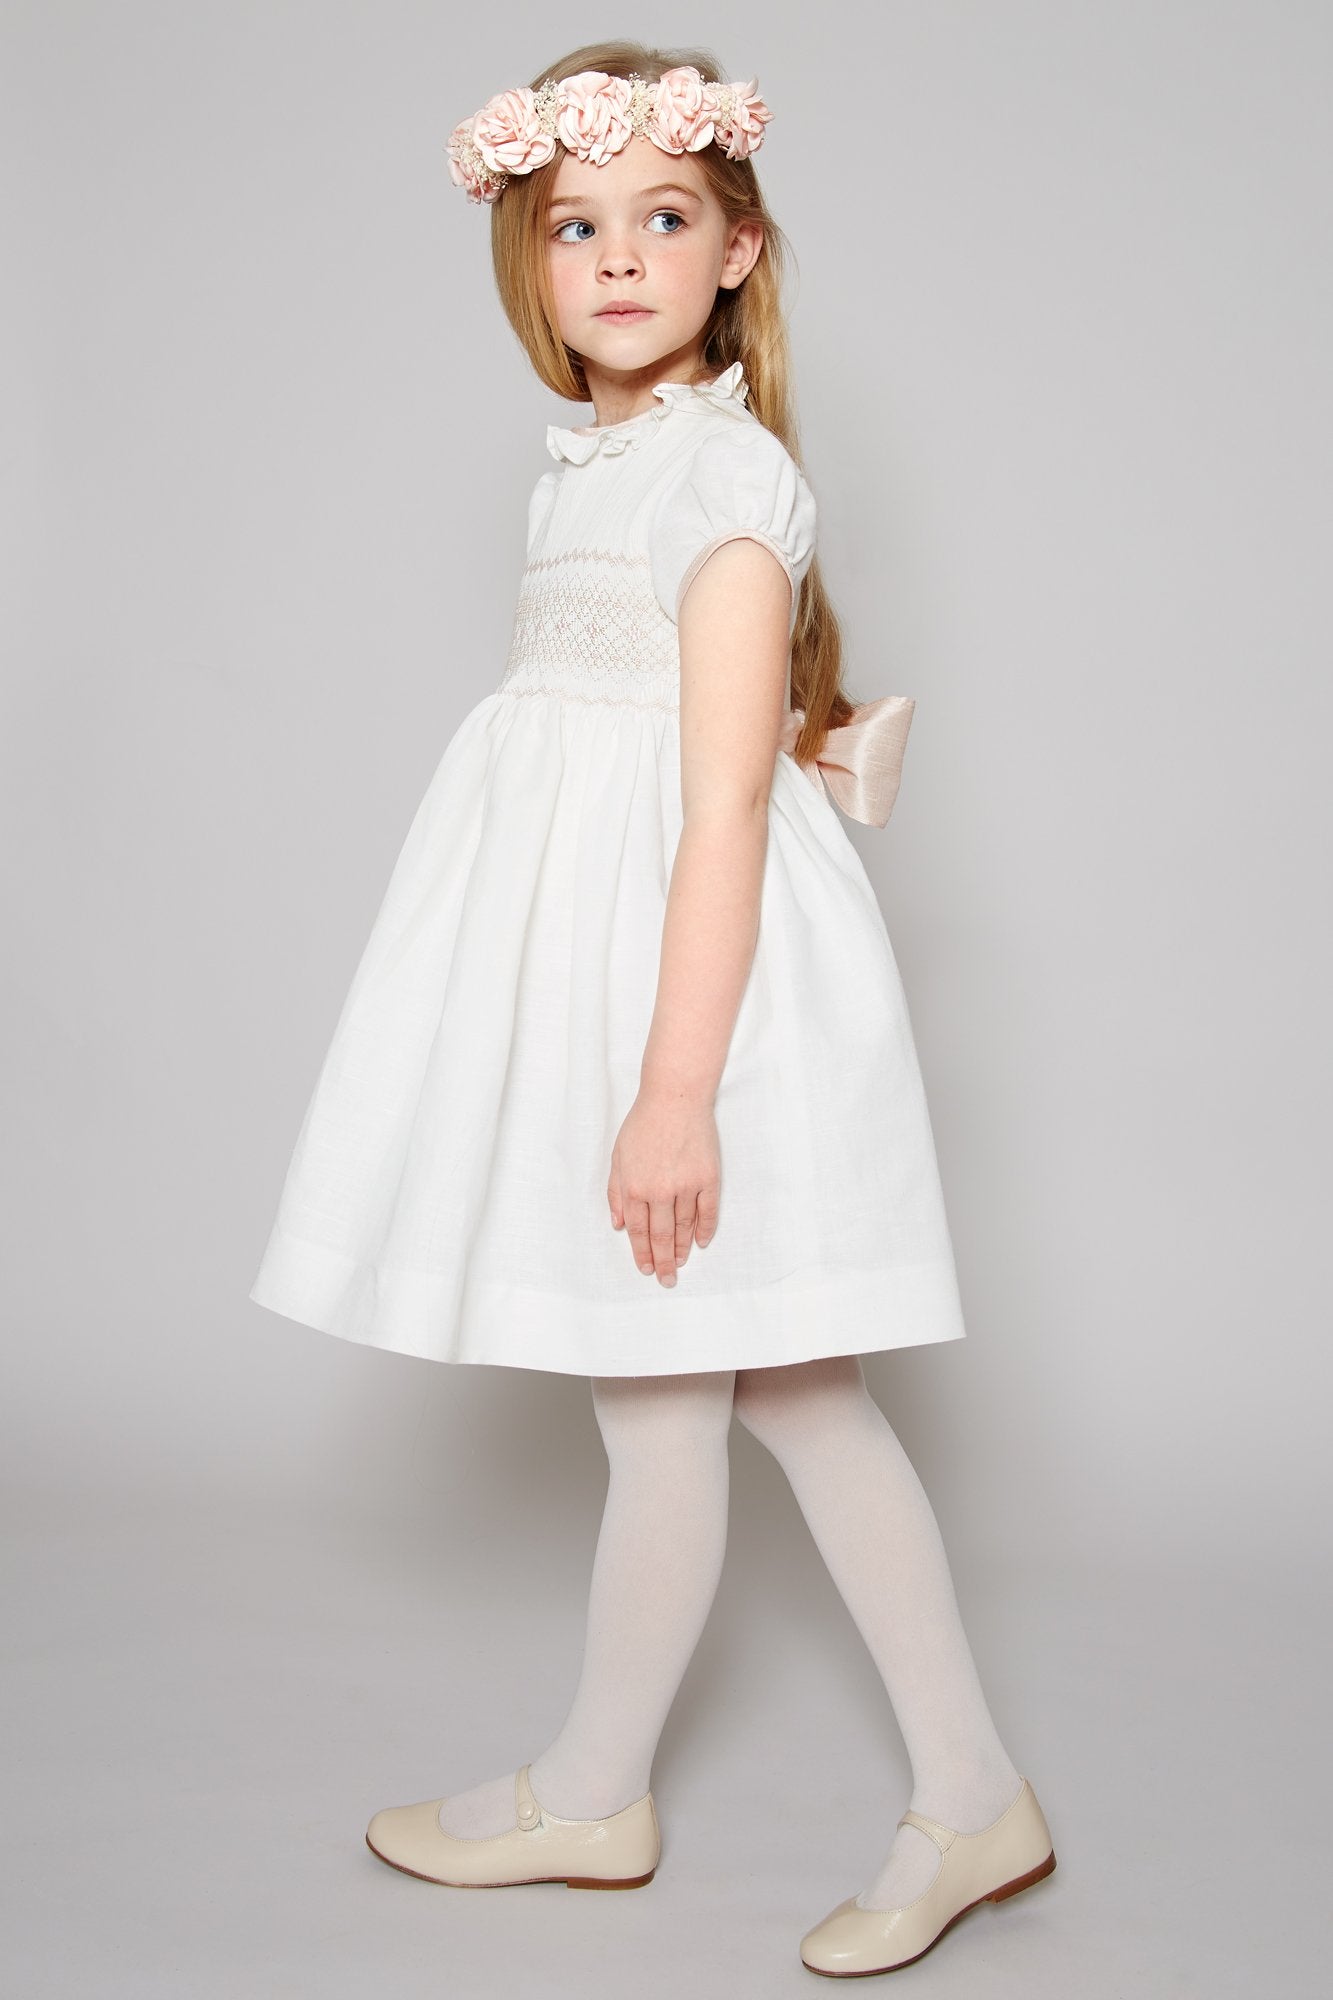 Ivory Handsmocked Occasion Dress with Pink Details (12mths-8yrs) Dresses  from Pepa London